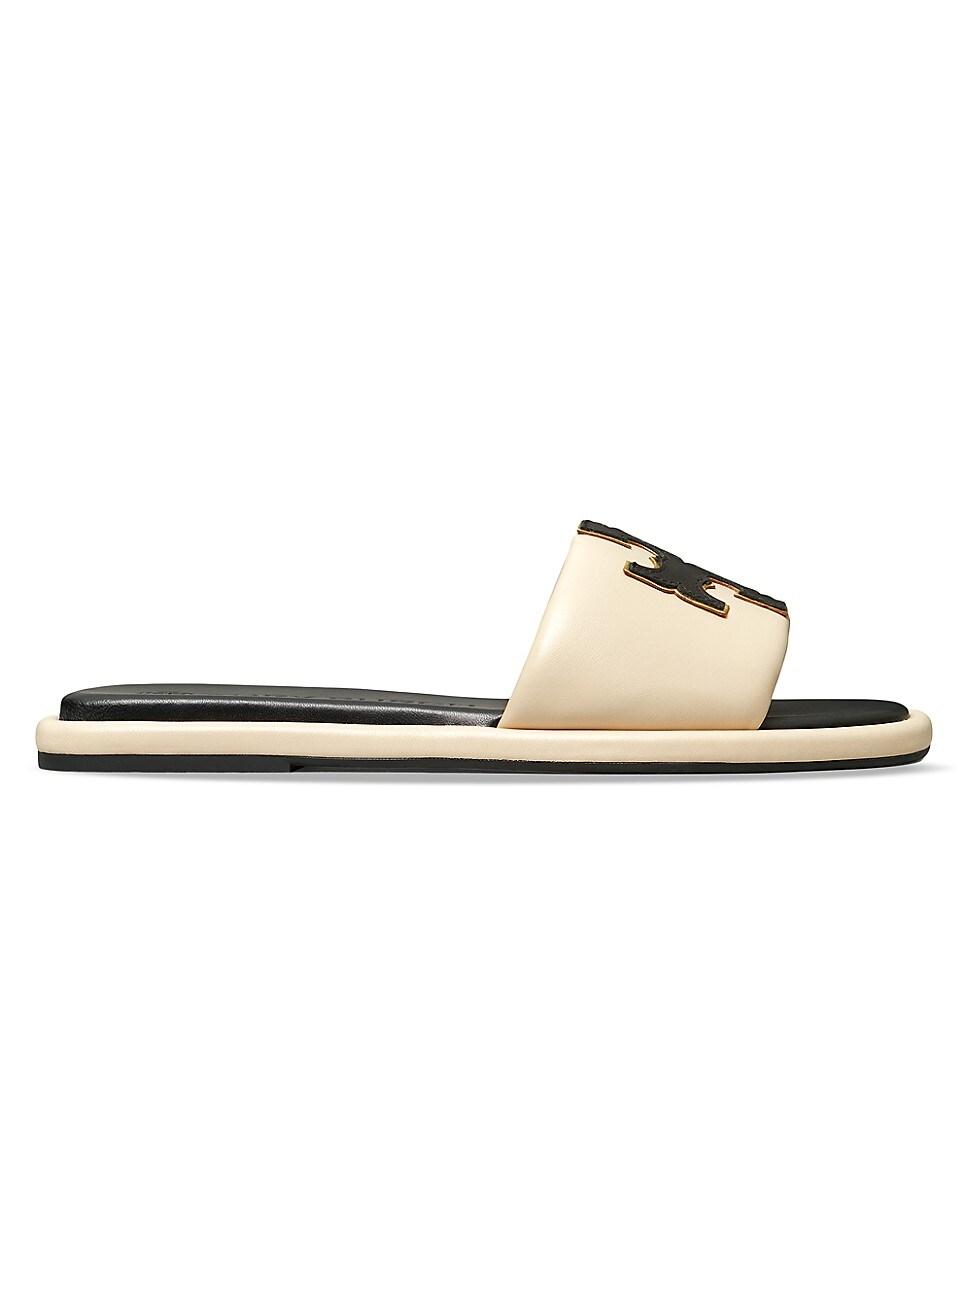 Tory Burch Double-t Monogram Padded Leather Slide Sandals in White | Lyst